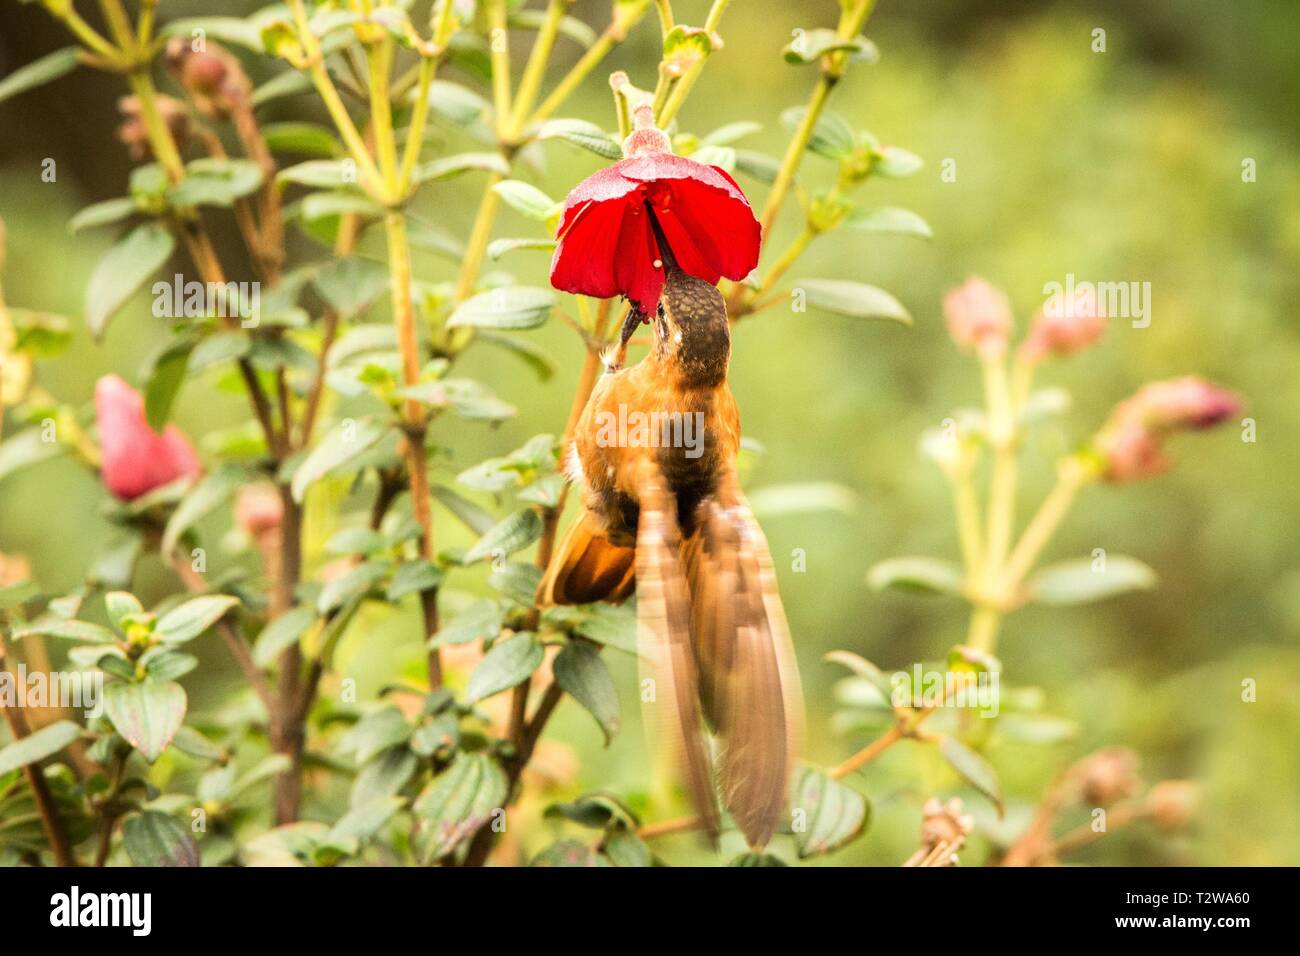 Shining sunbeam howering next to red flower, Colombia hummingbird with outstretched wings,hummingbird sucking nectar from blossom,high altitude animal Stock Photo